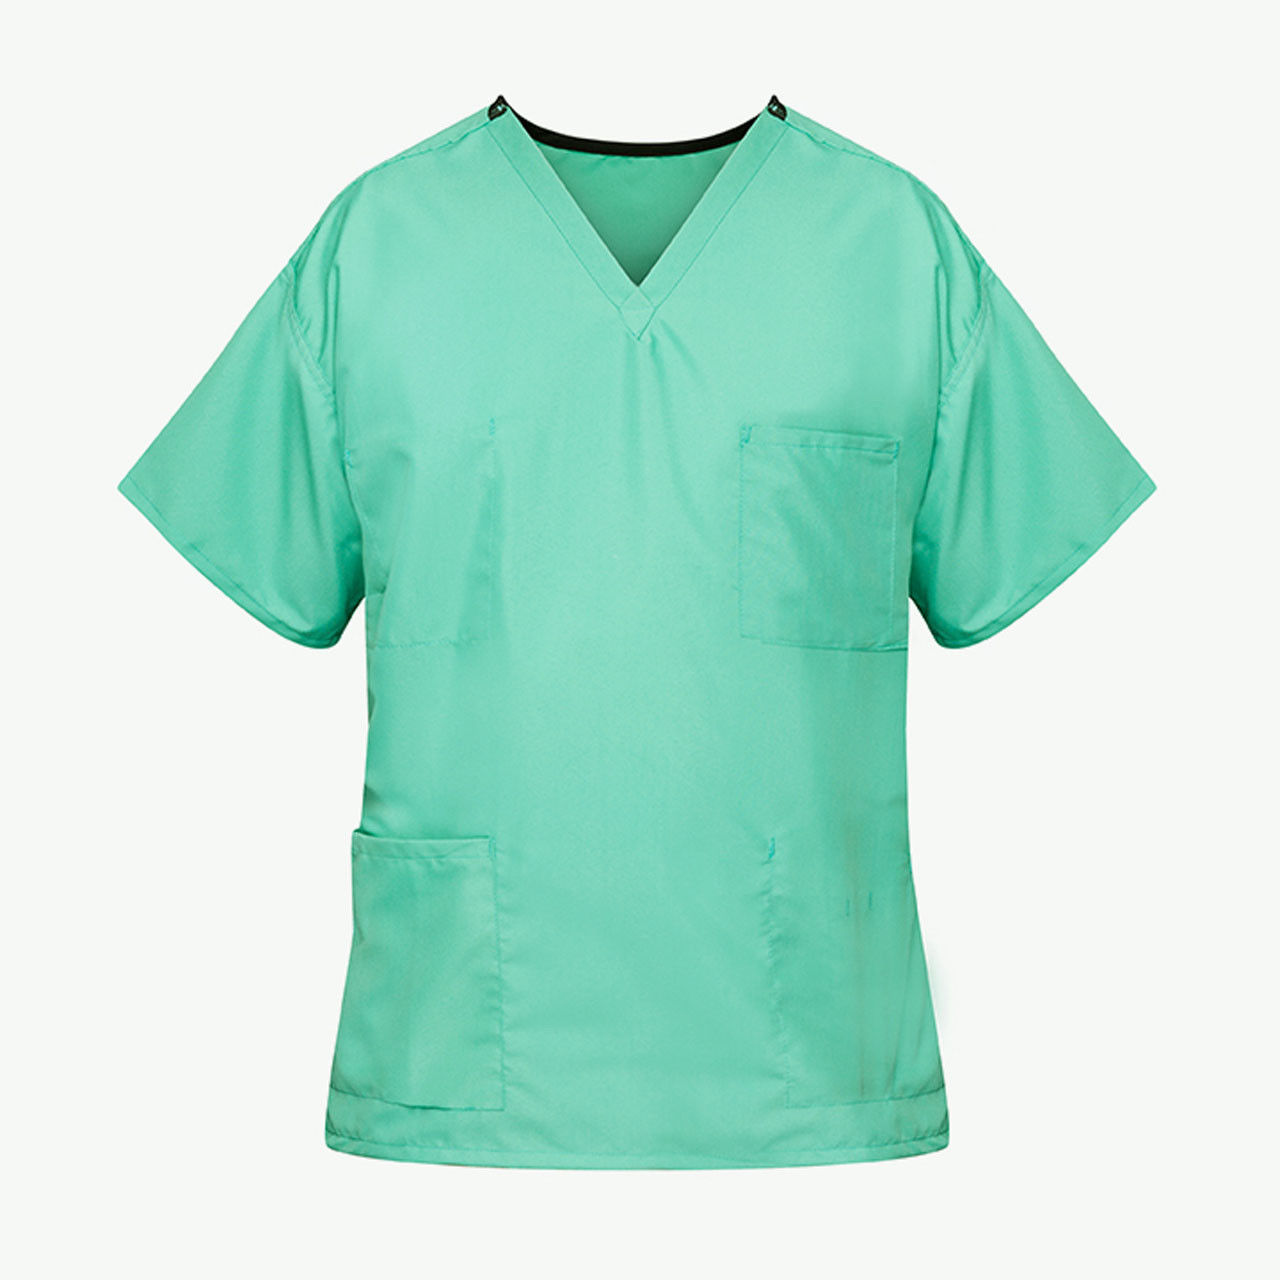 What advantage does the reversible style of these Jade Green scrubs offer?